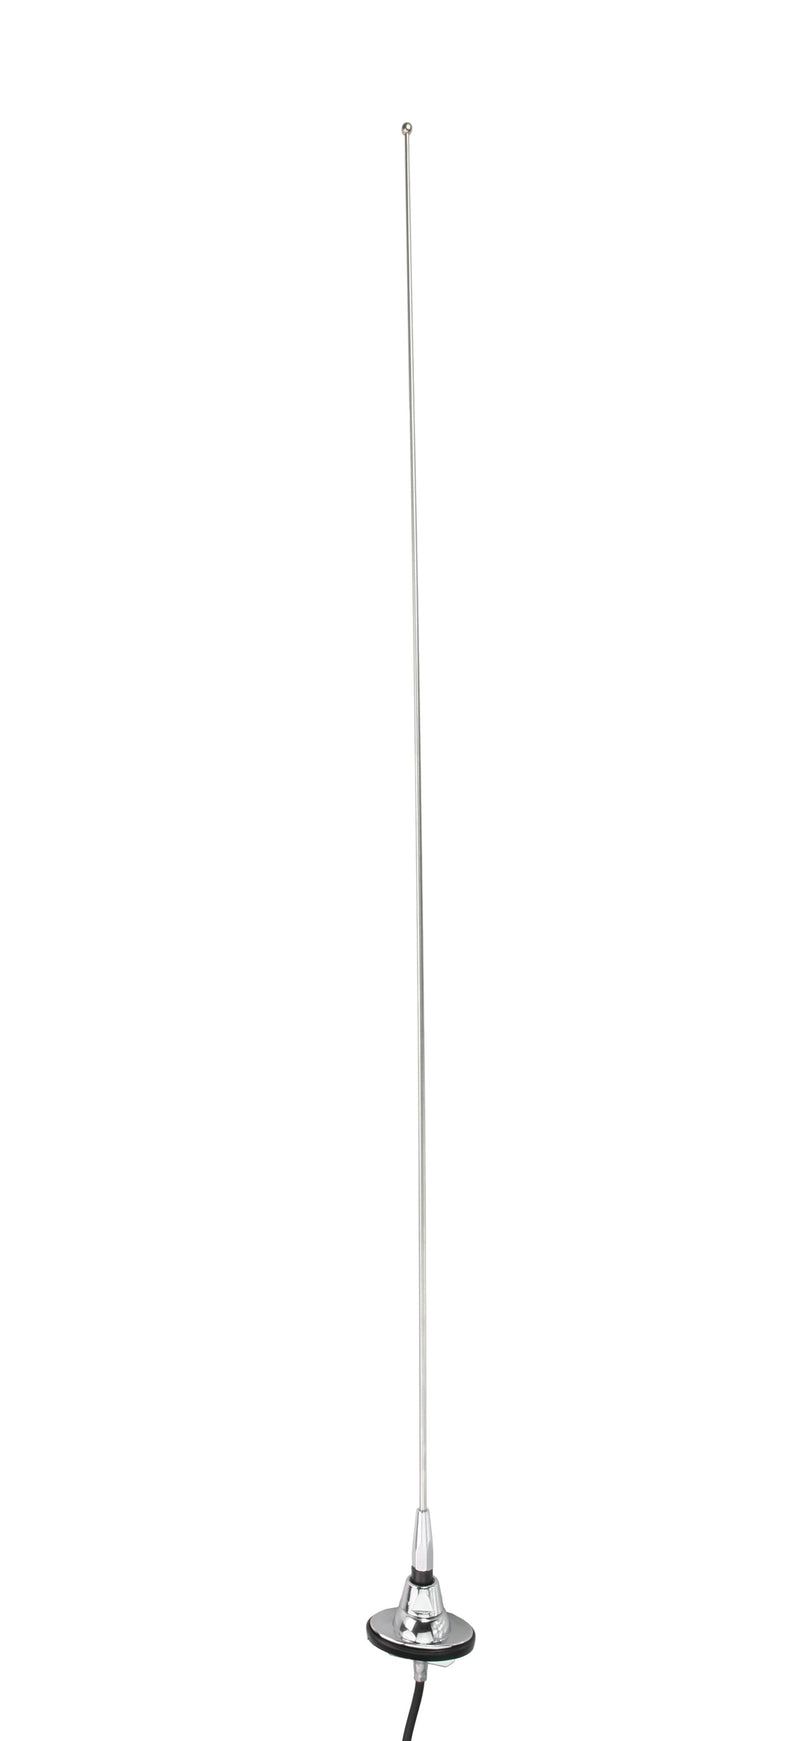 1991-94 Ford Explorer Replacement Antenna